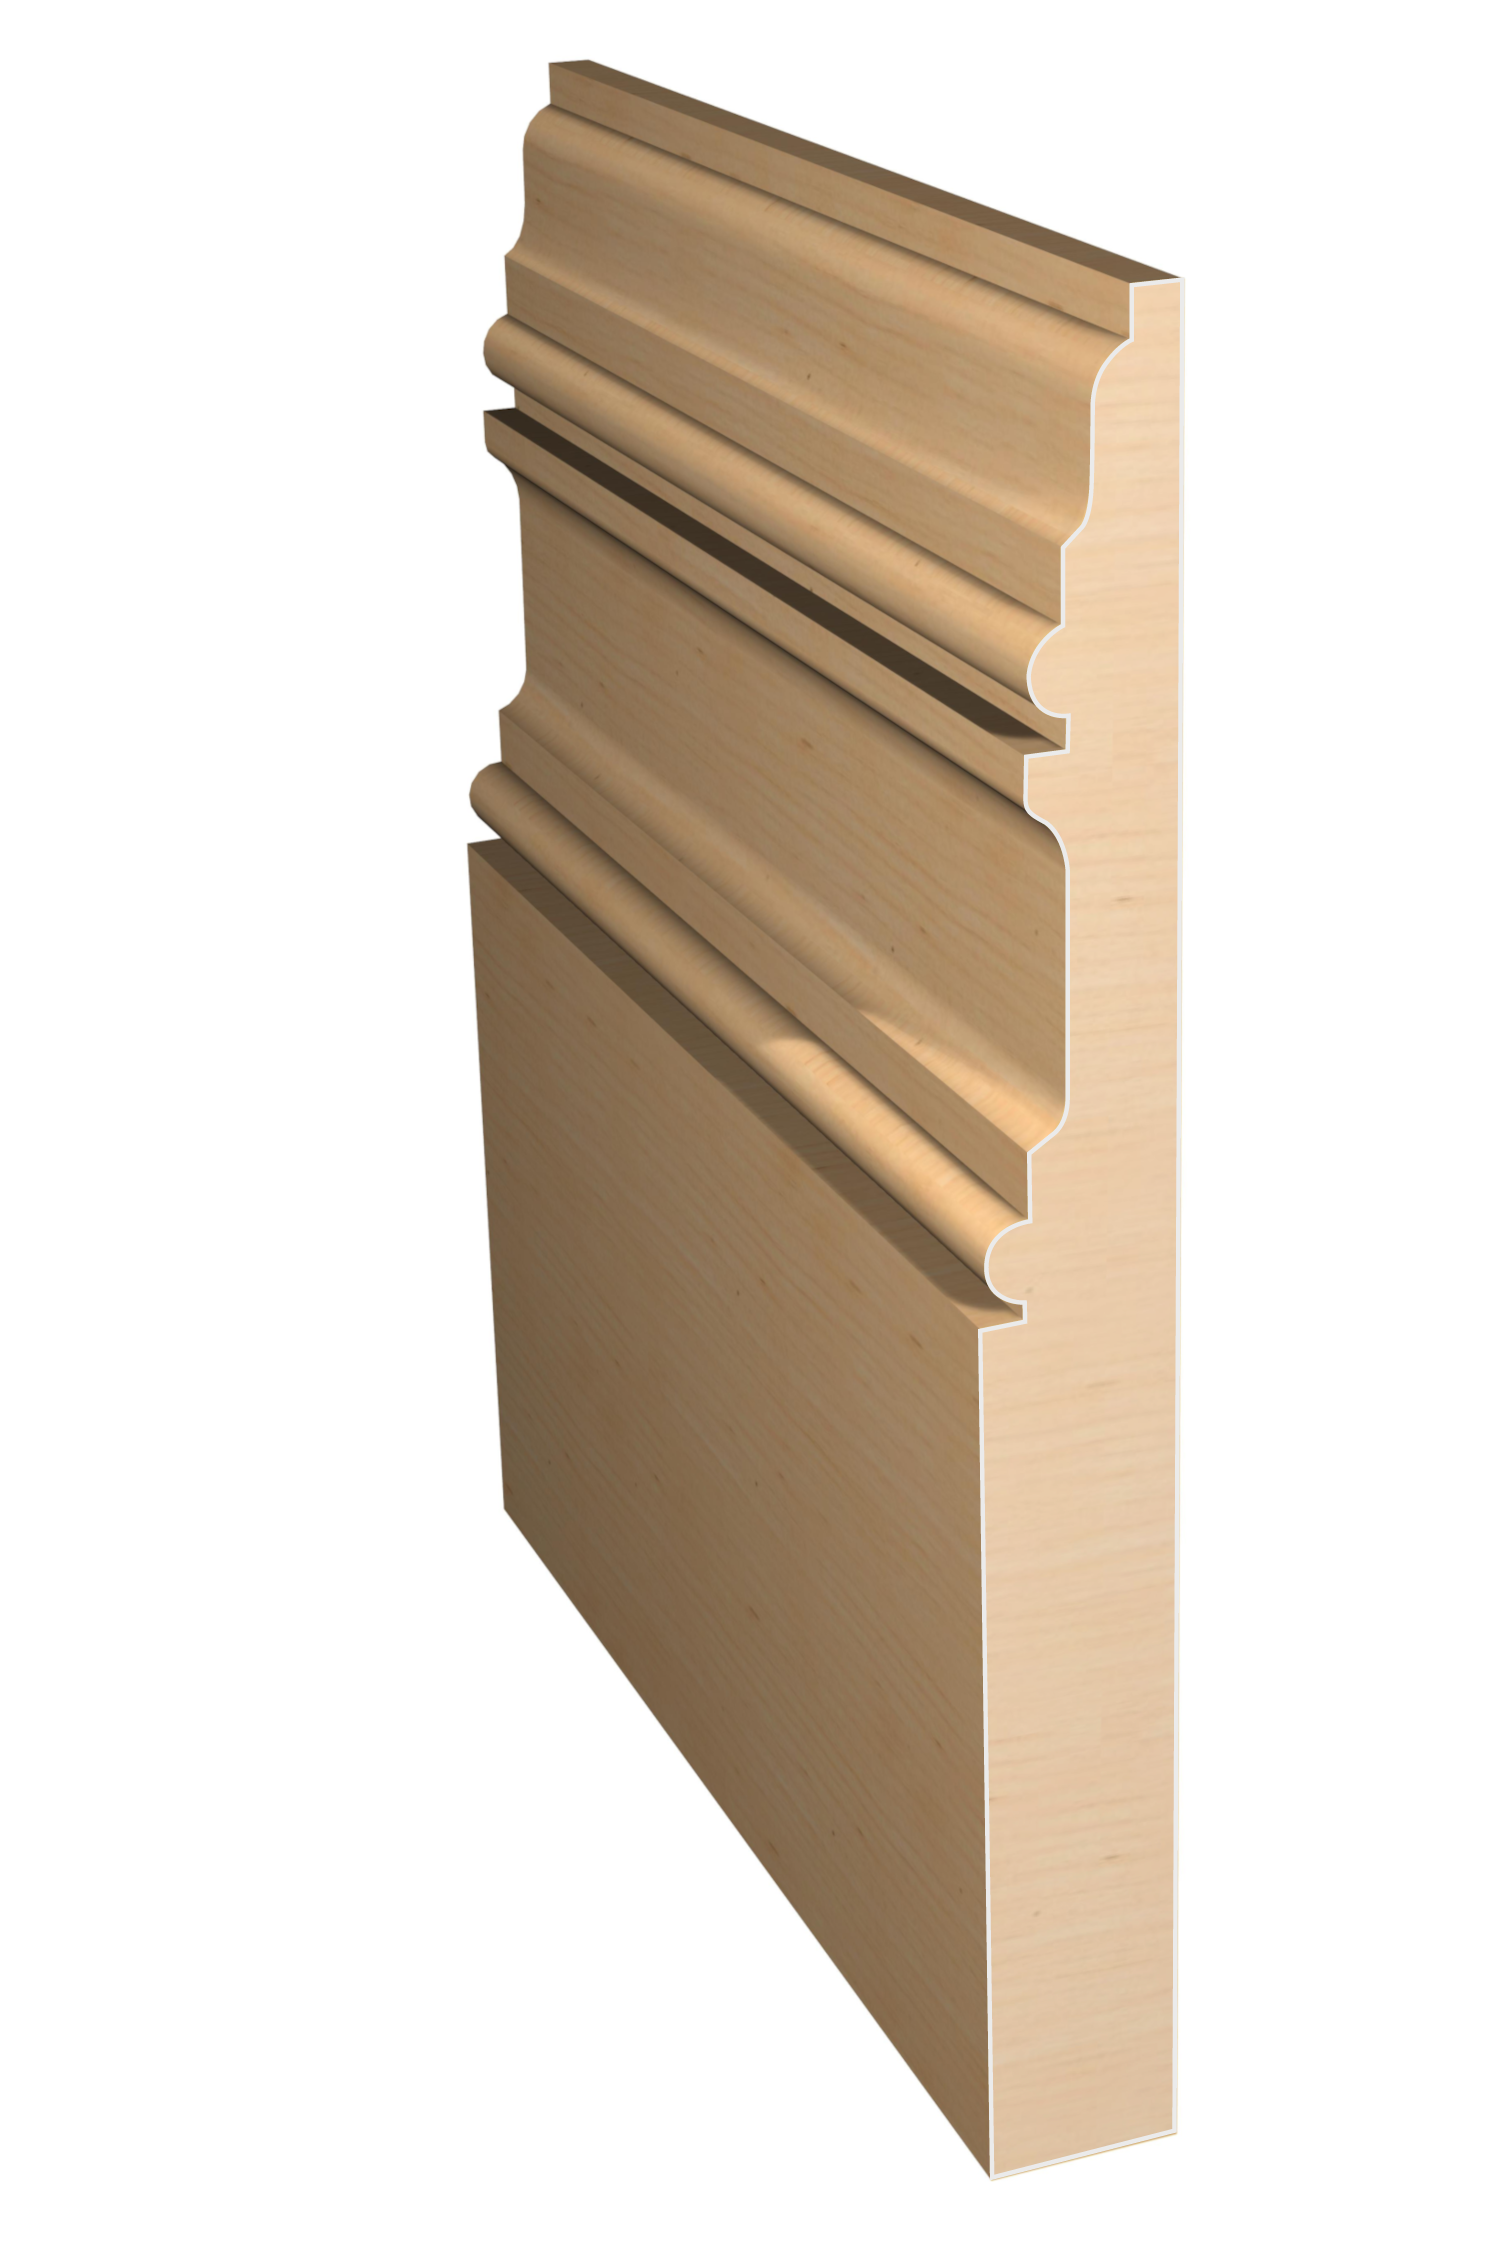 Three dimensional rendering of custom base wood molding BAPL71210 made by Public Lumber Company in Detroit.